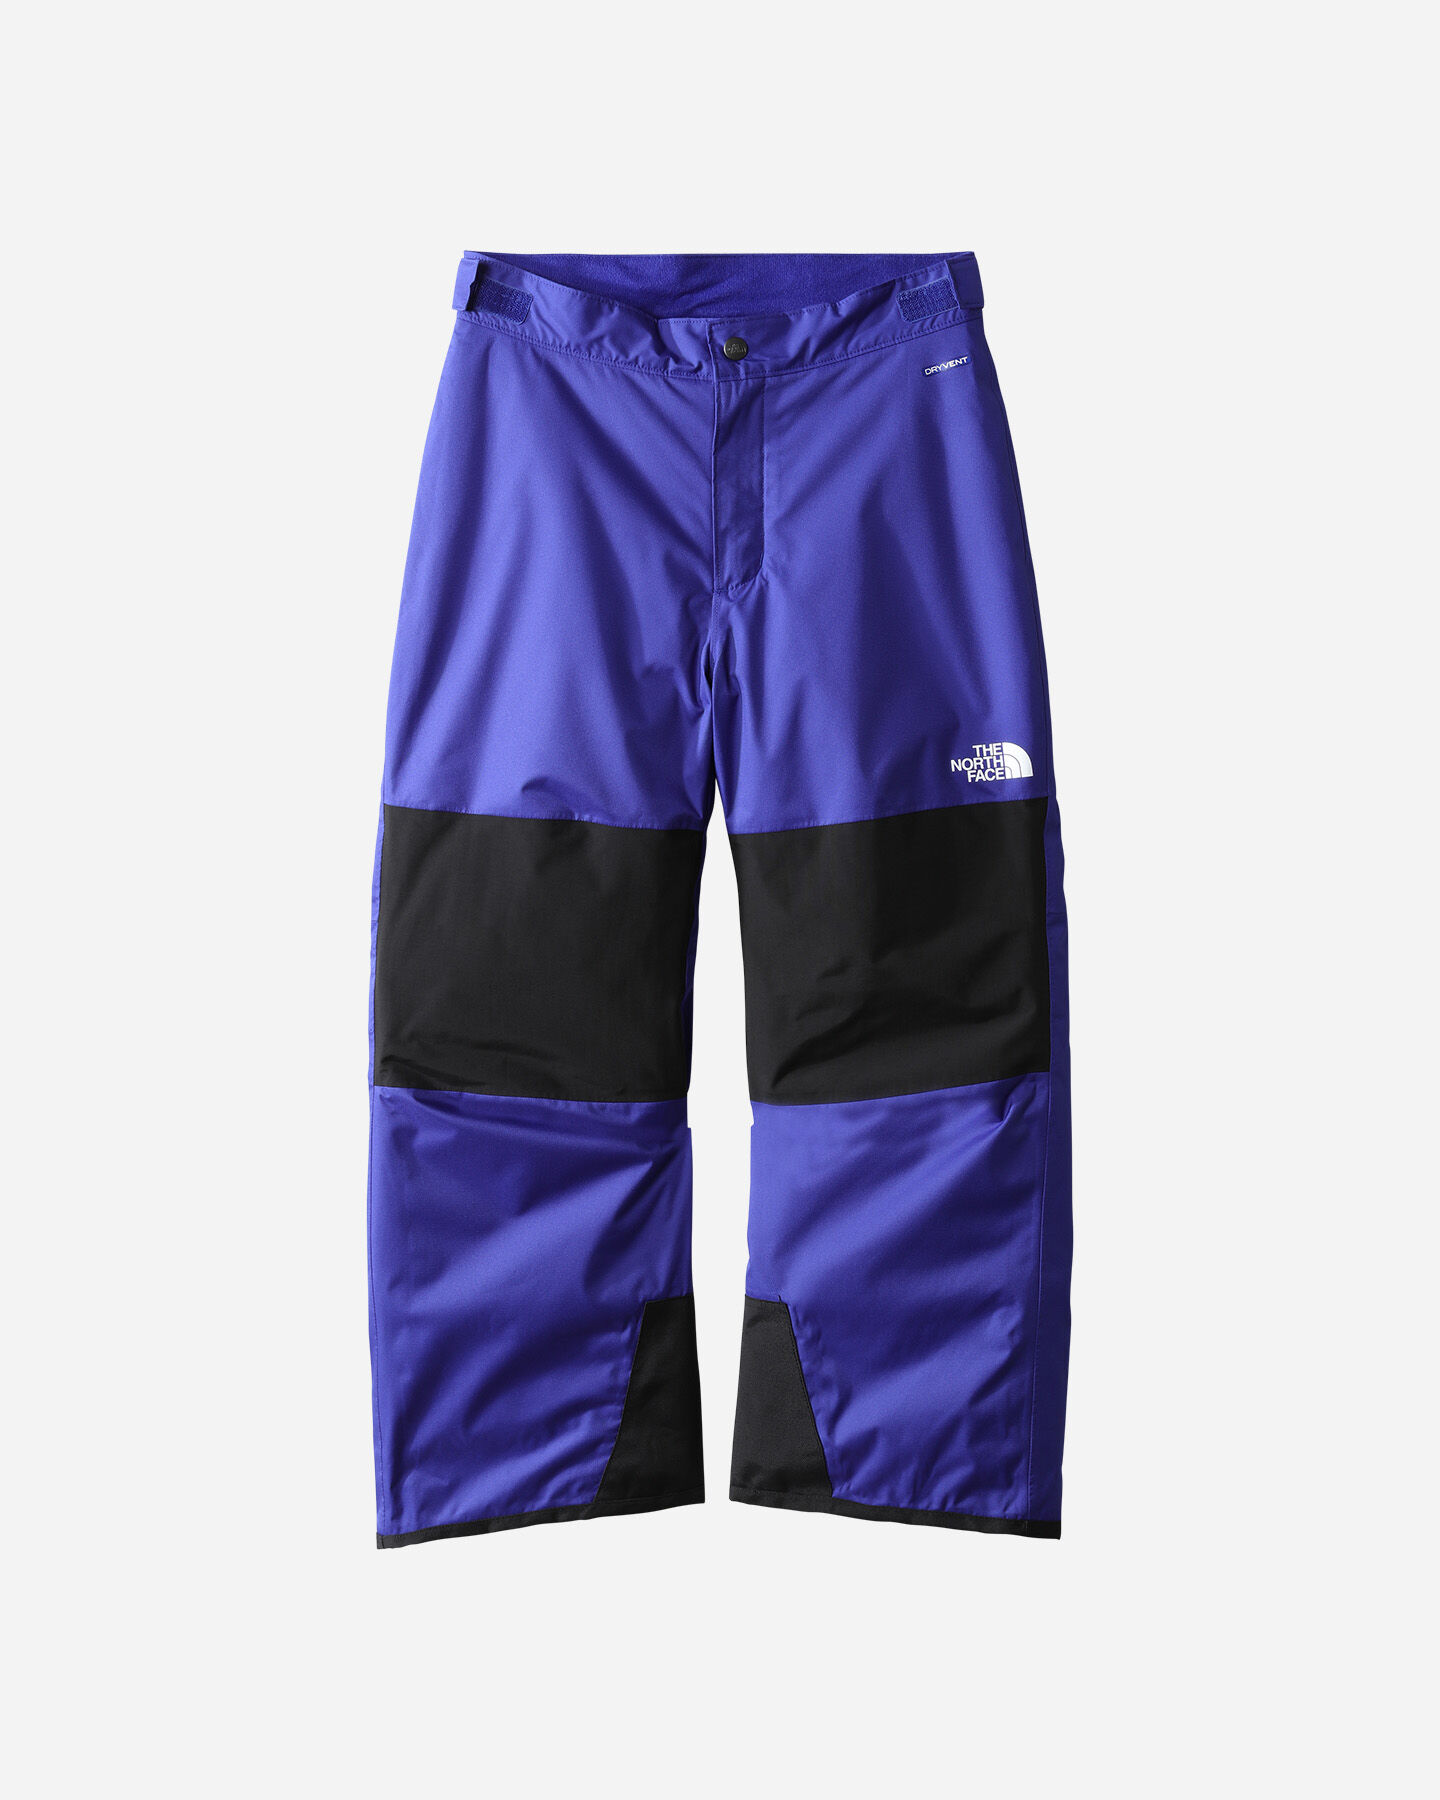  Pantalone outdoor THE NORTH FACE FREEDOM INSULATED JR S5475619|40S|XL scatto 0